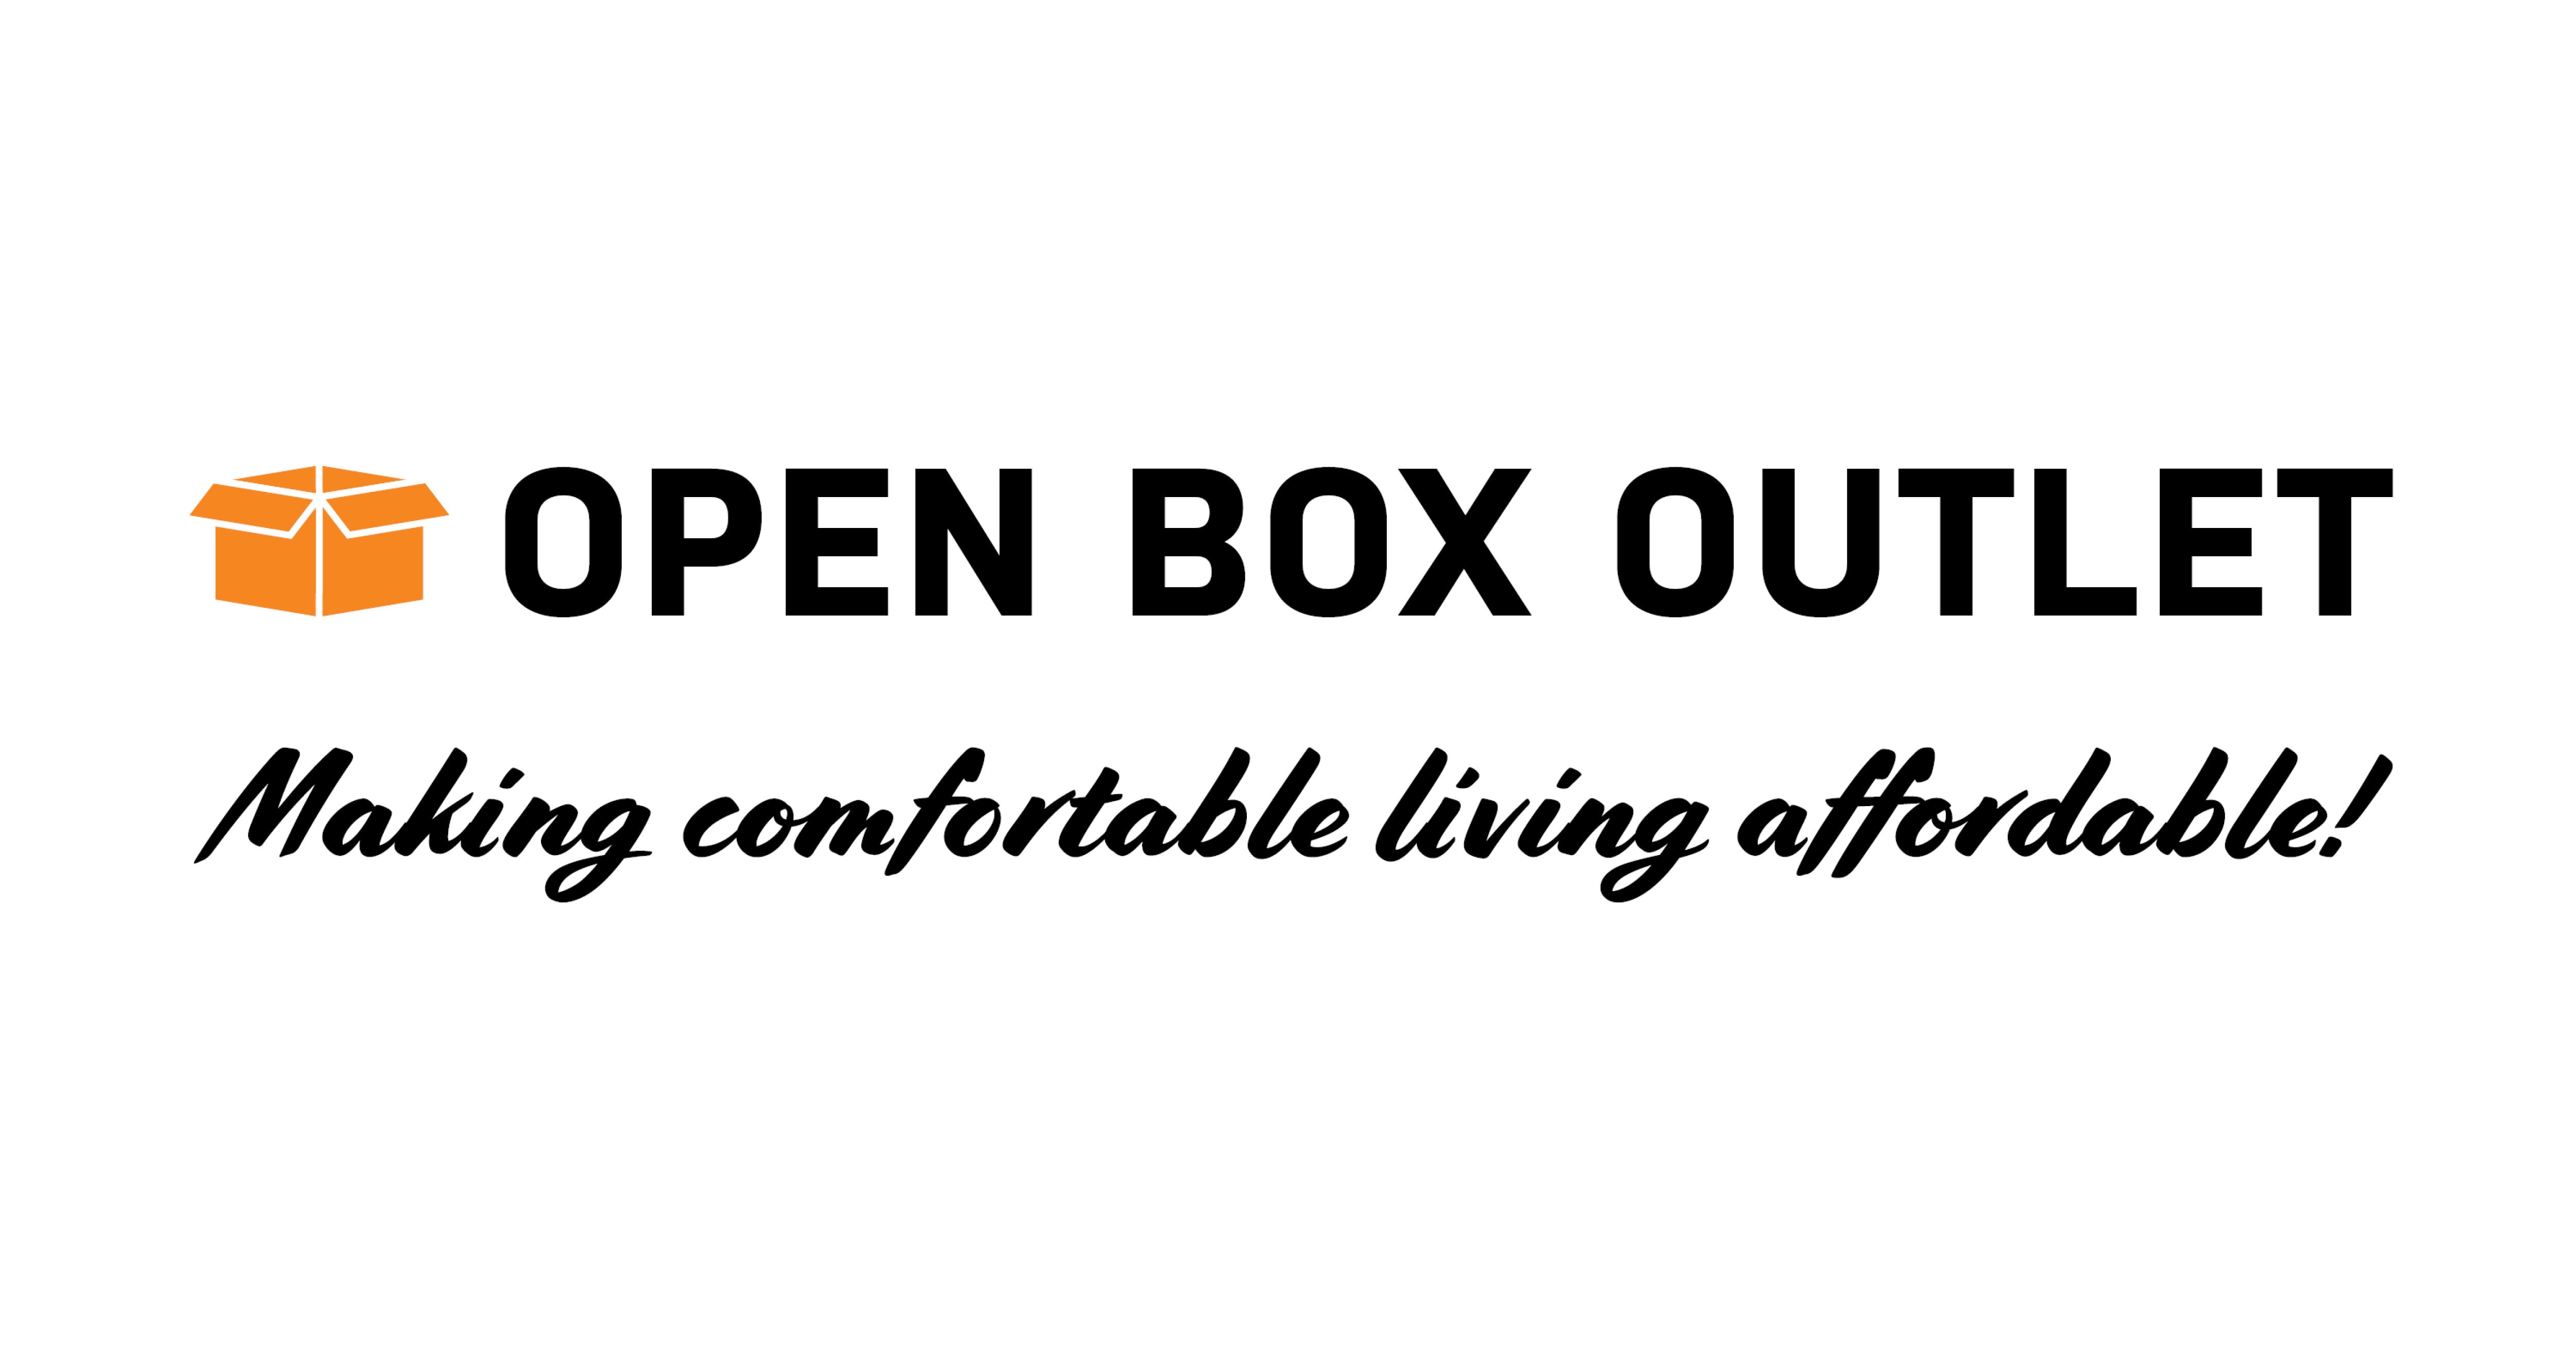 Open Box Outlet